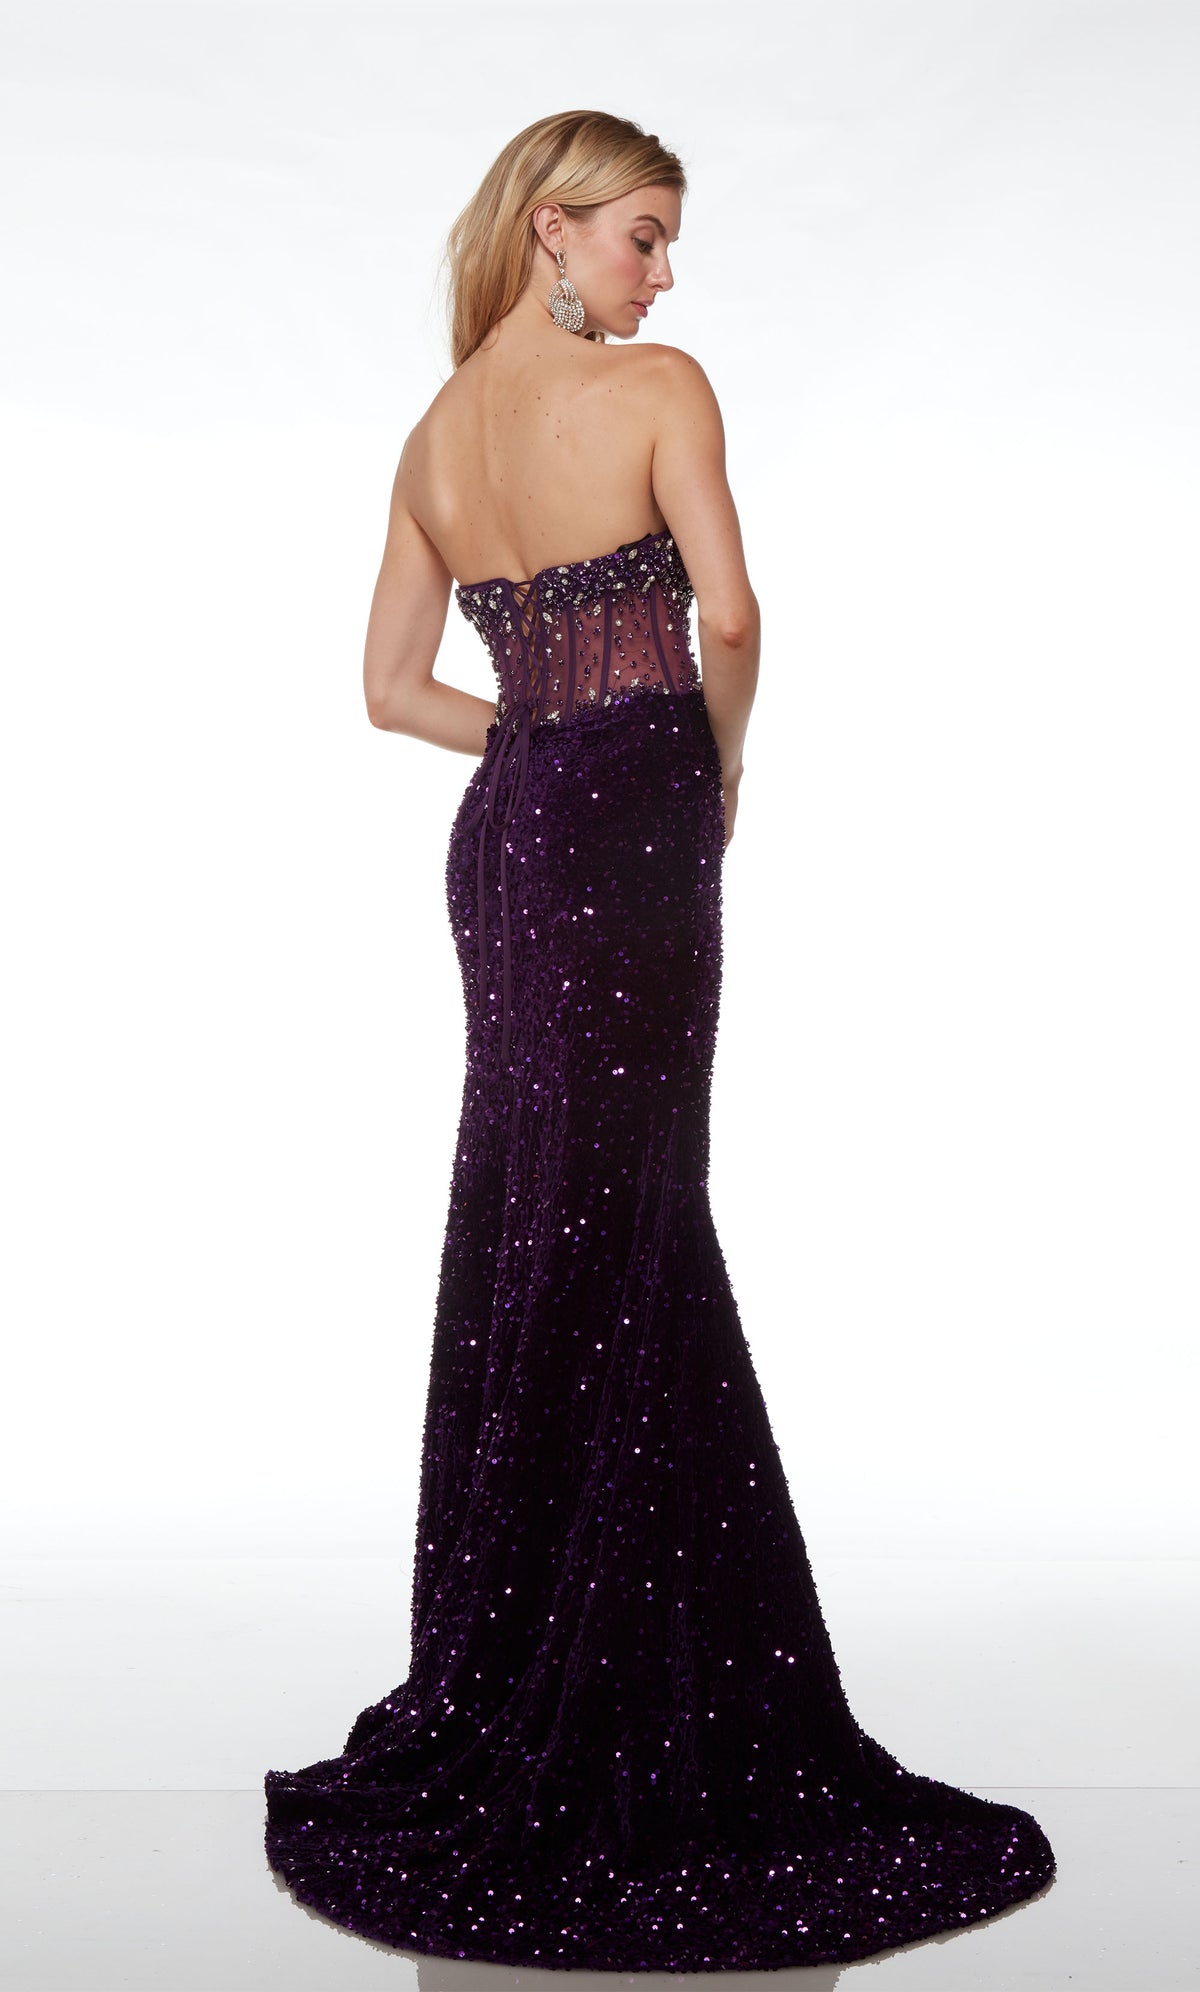 Fully embellished purple dress: strapless sheer corset bodice, high slit, lace-up back, and train for an glamorous and stylish look.